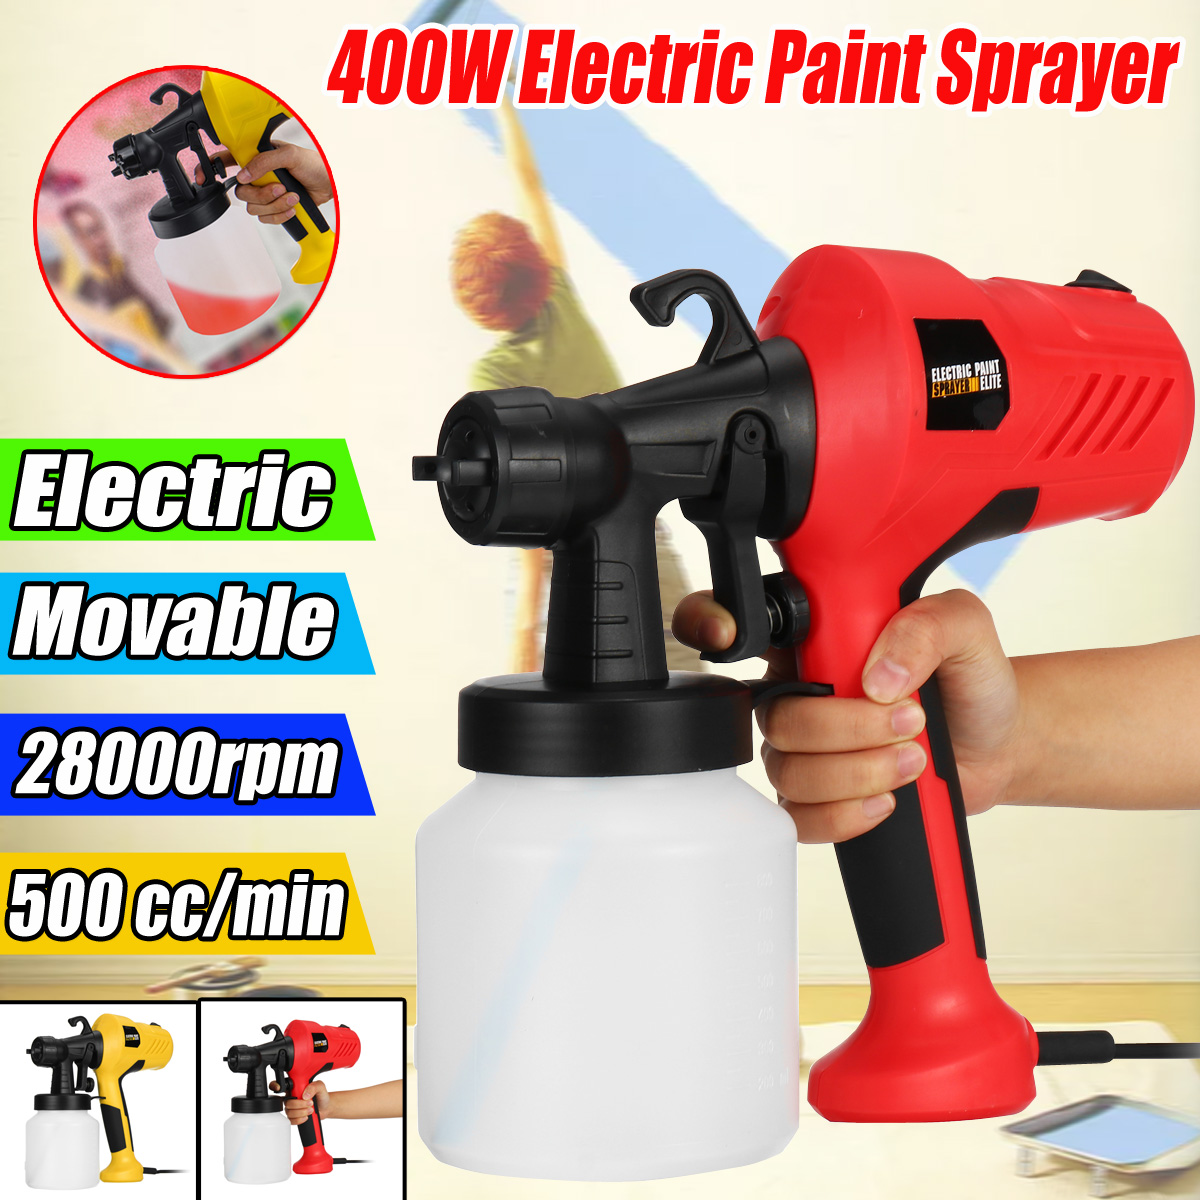 Electric-Spray-Paint-Sprayer-Compressor-for-Car-Wood-Wall-with-Flow-Control-1701162-2